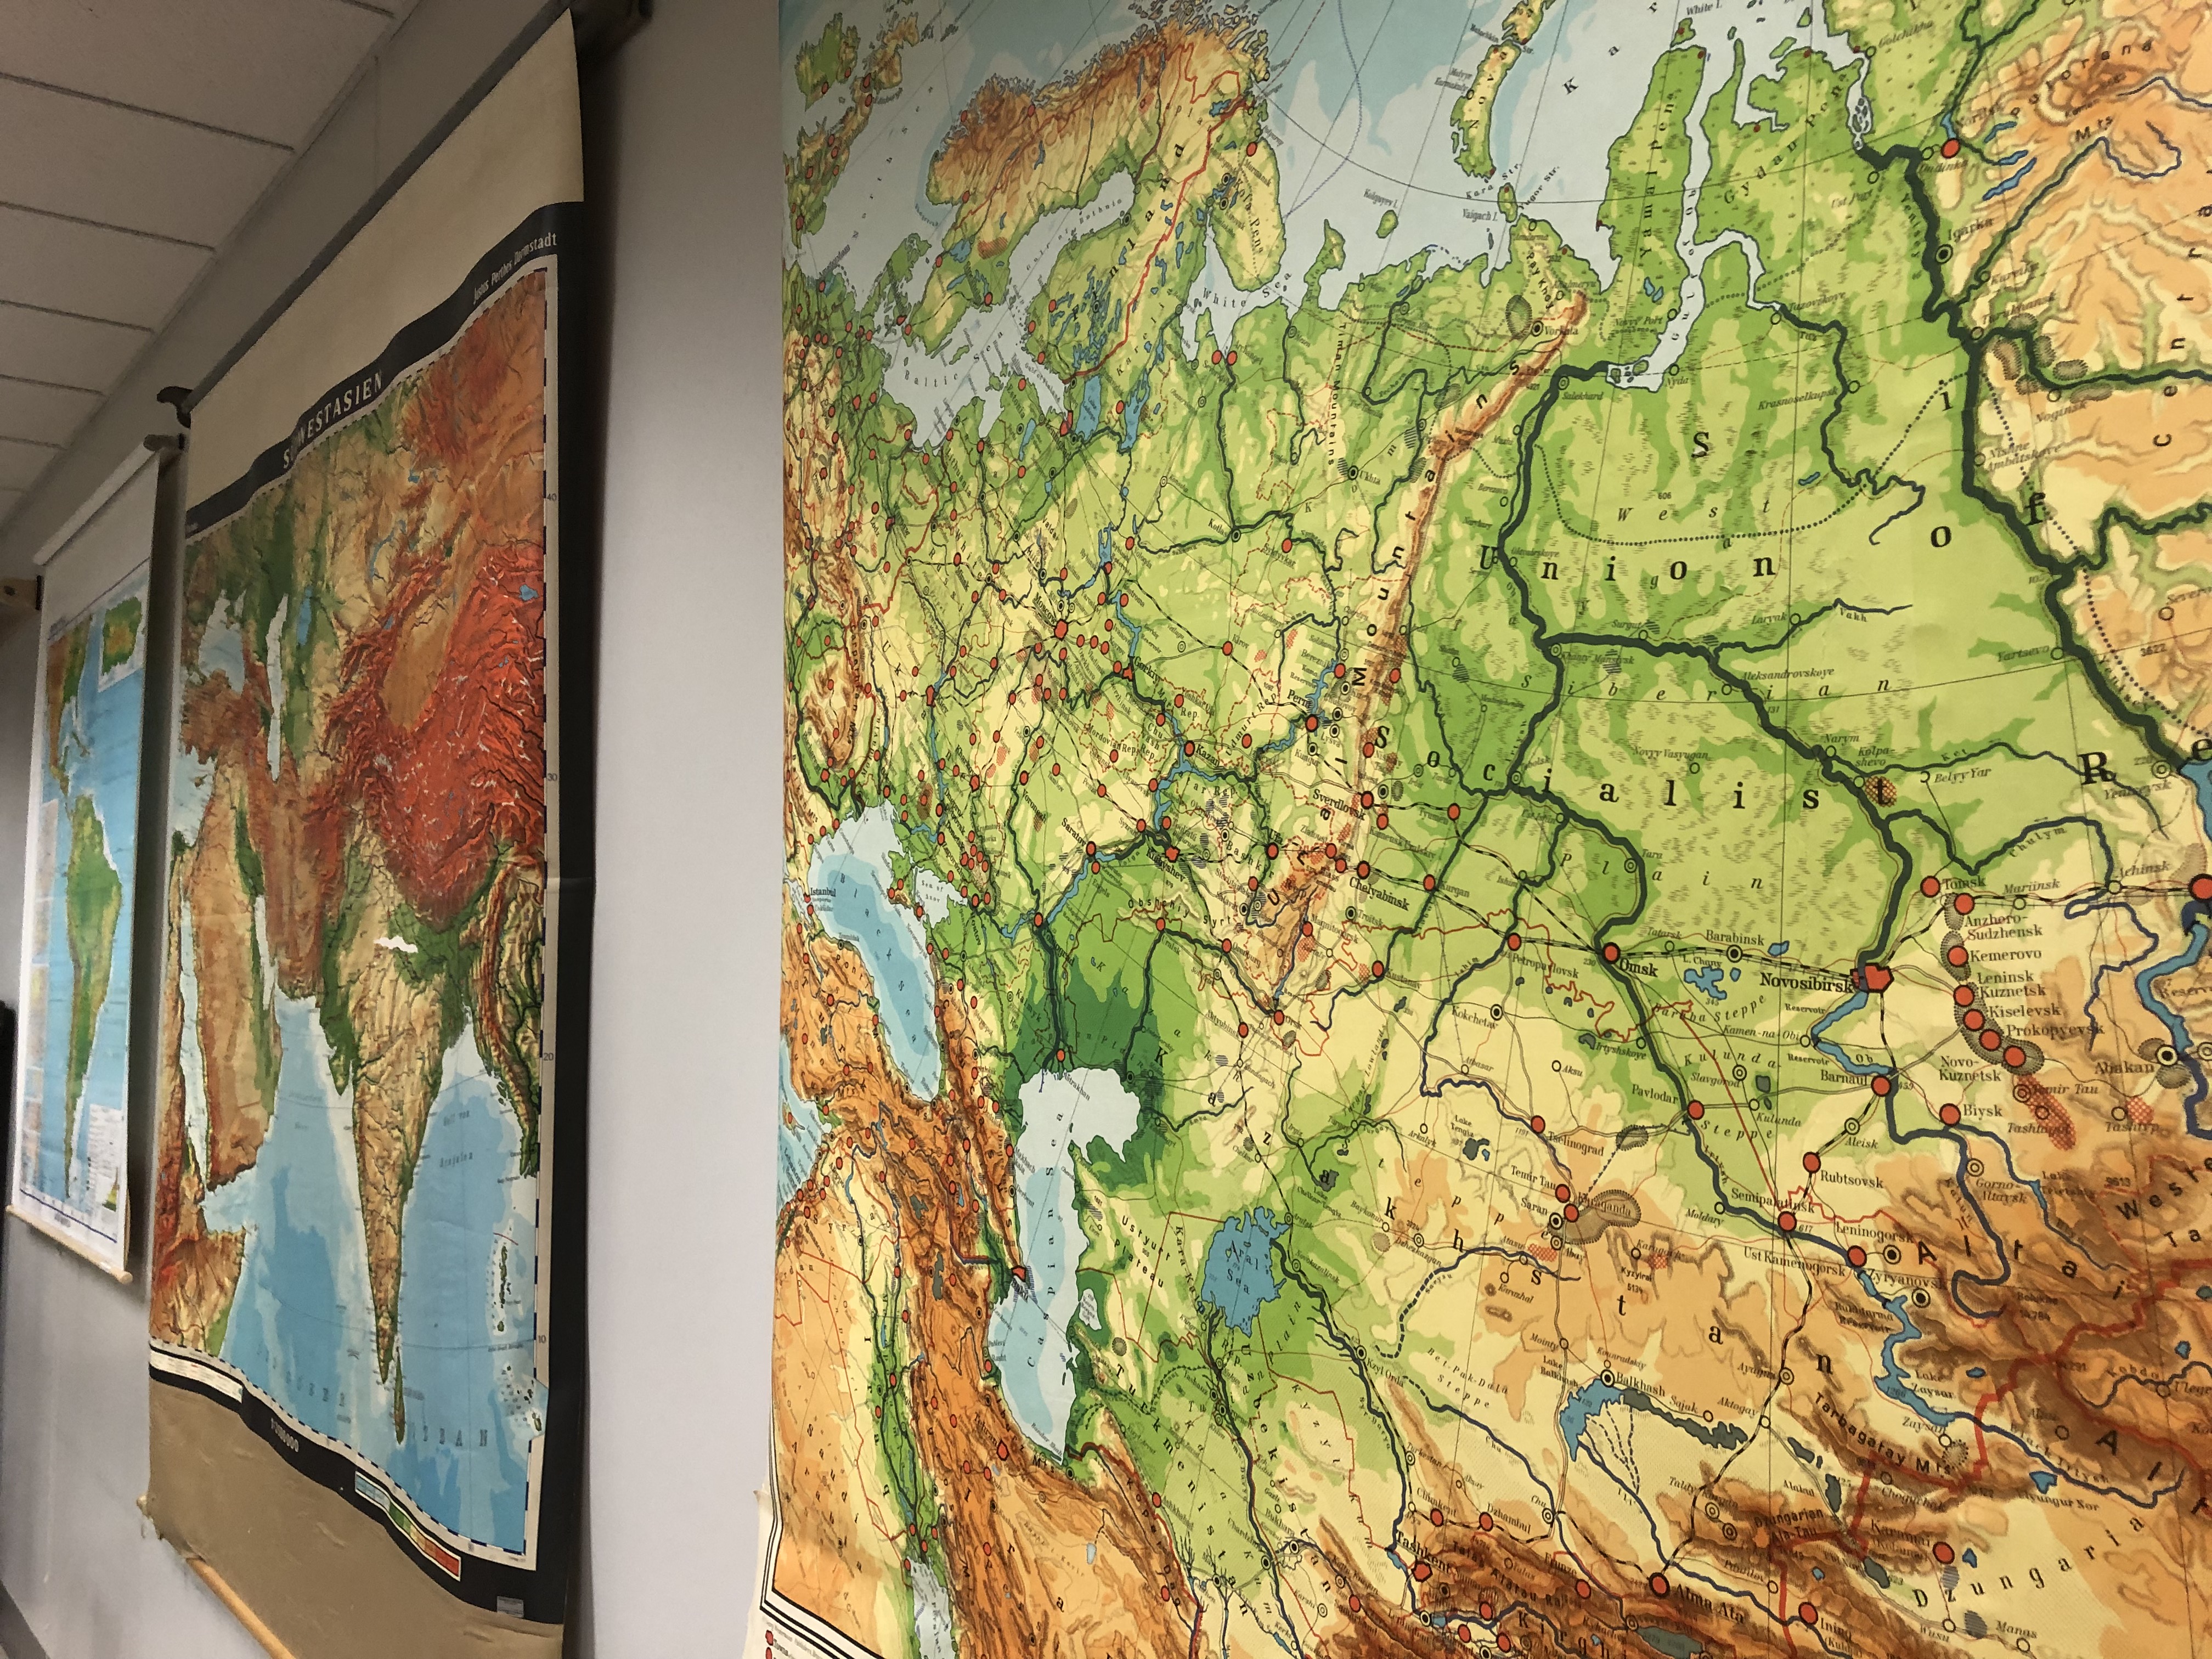 image of maps in hardin hall